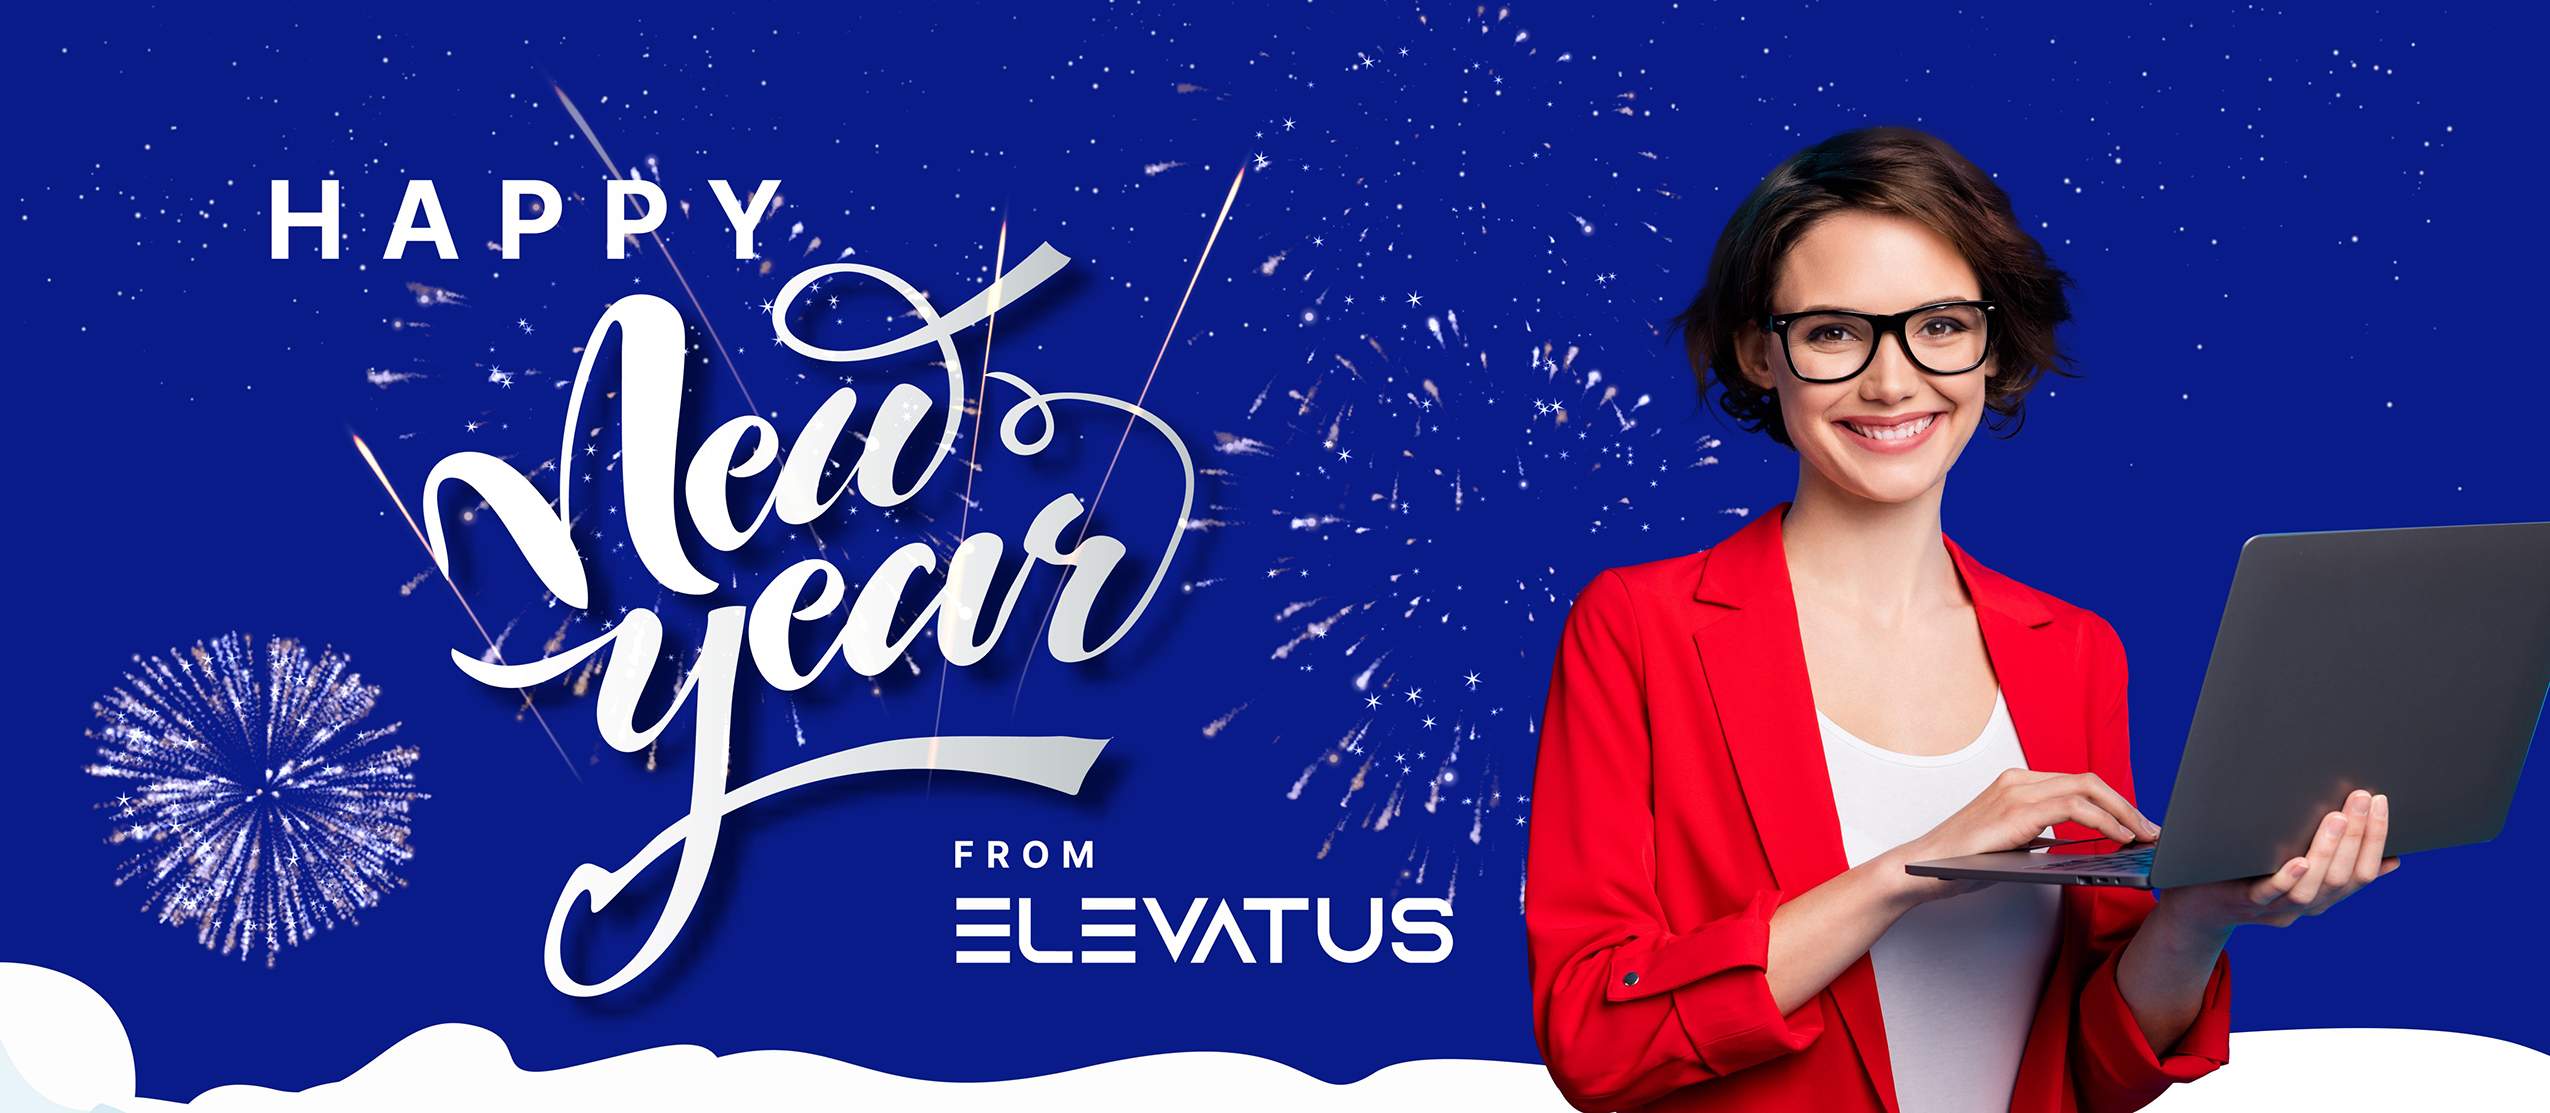 10 talent acquisition New Year's resolutions